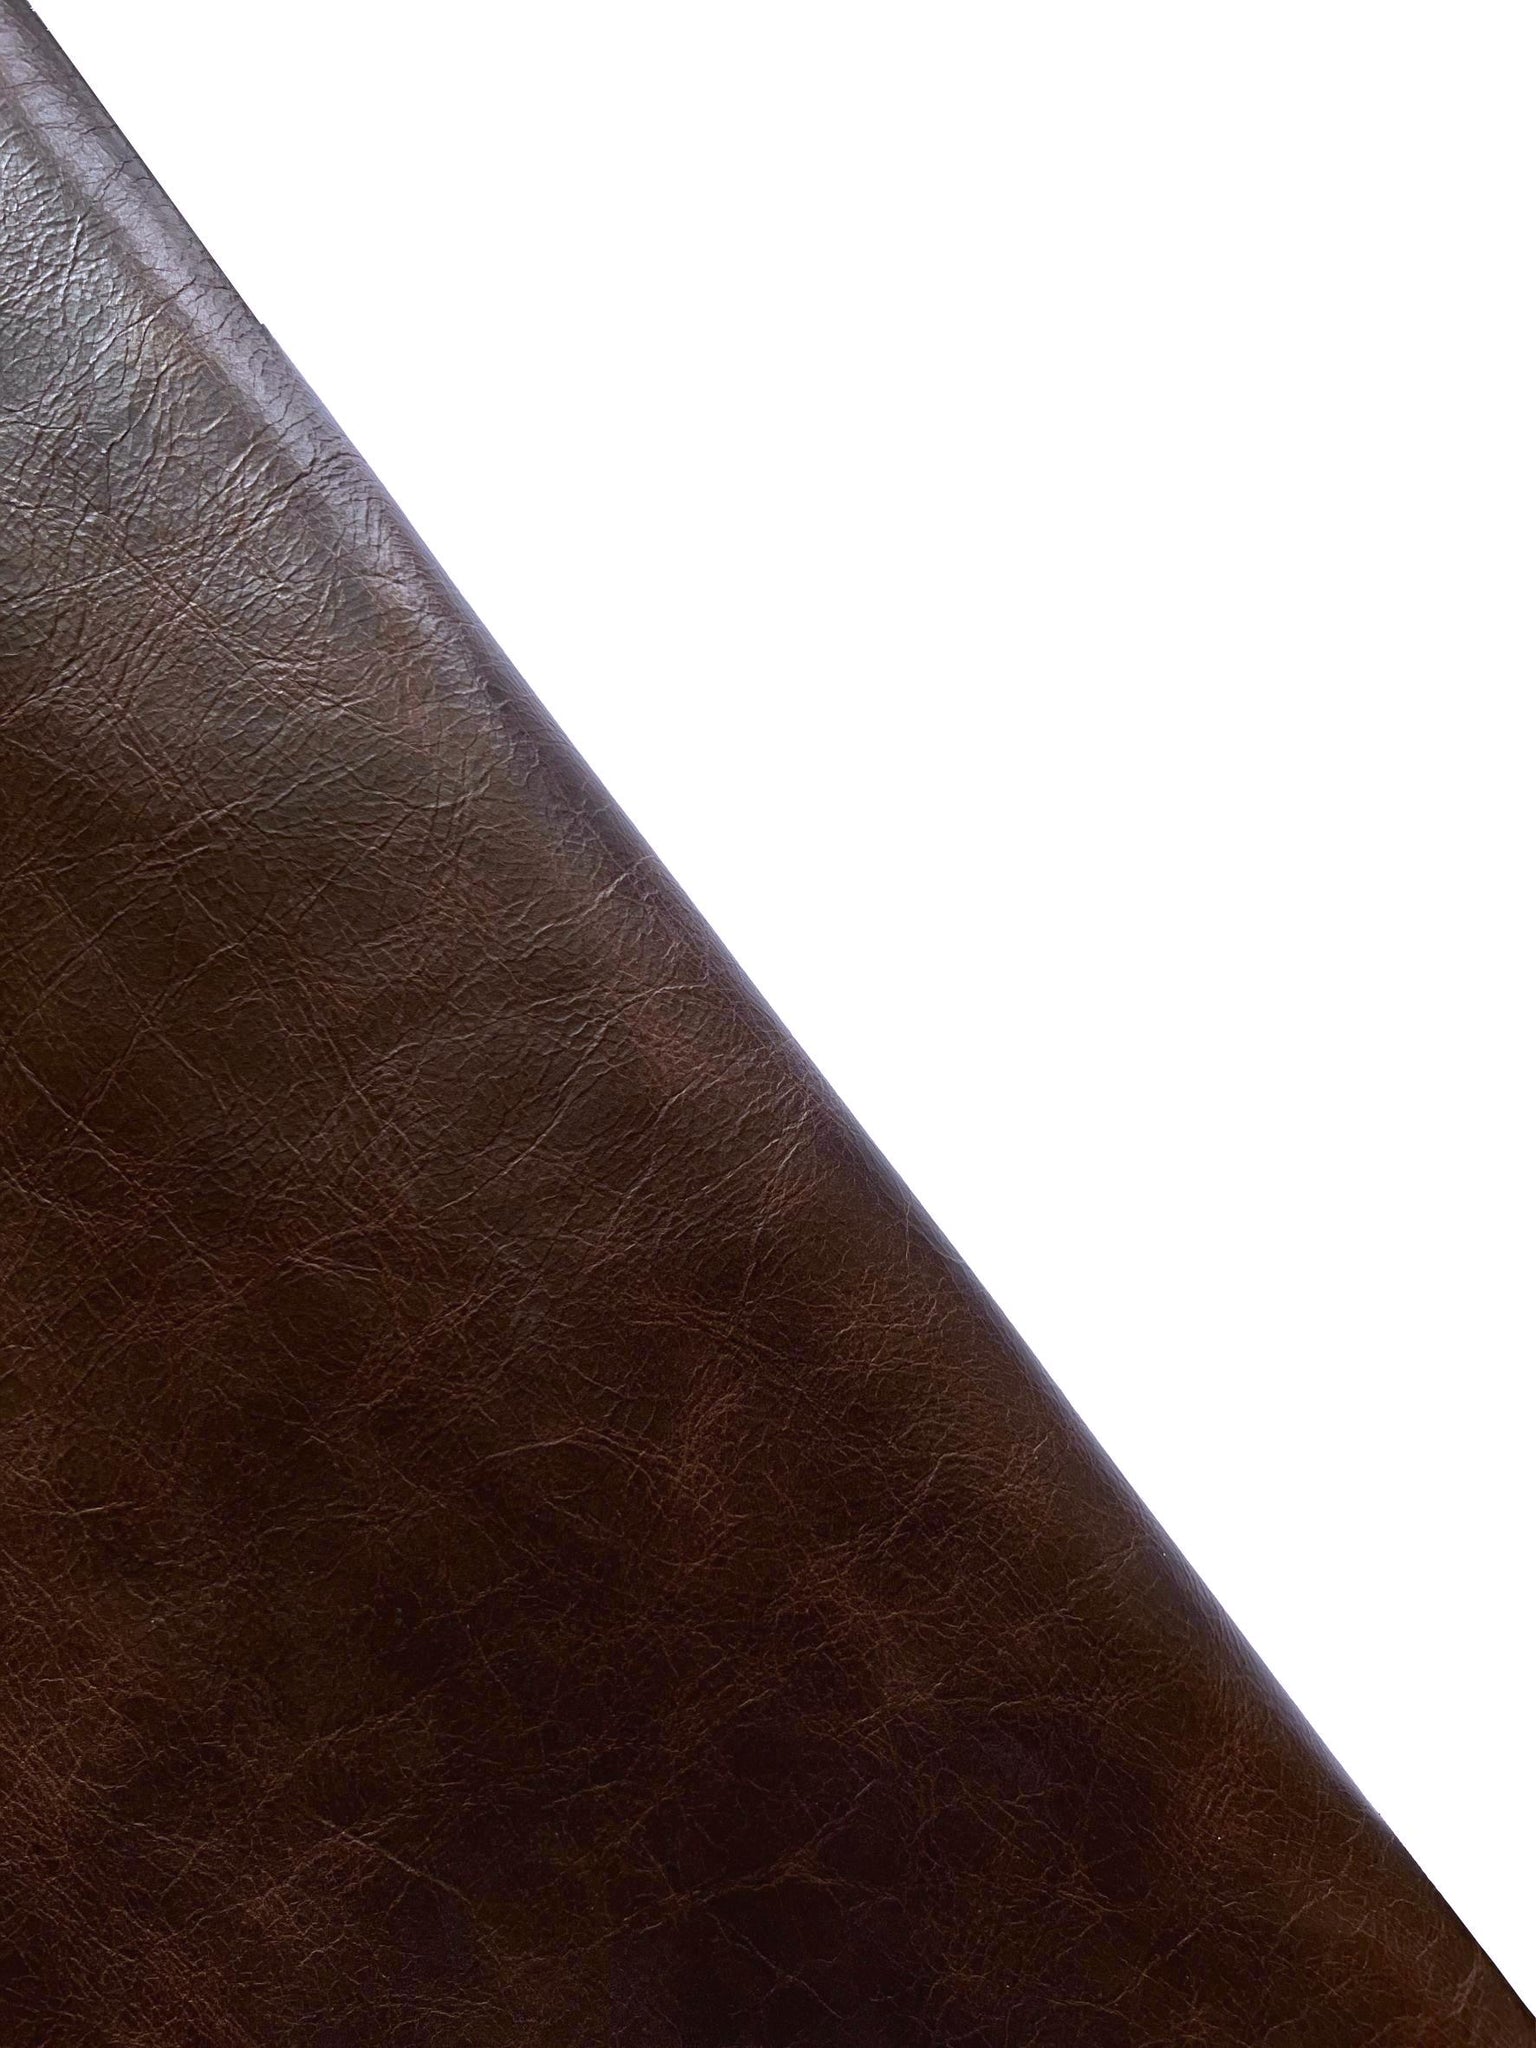 Cordovan Distressed Cow Leather Whole Hide (Upholstery Leather